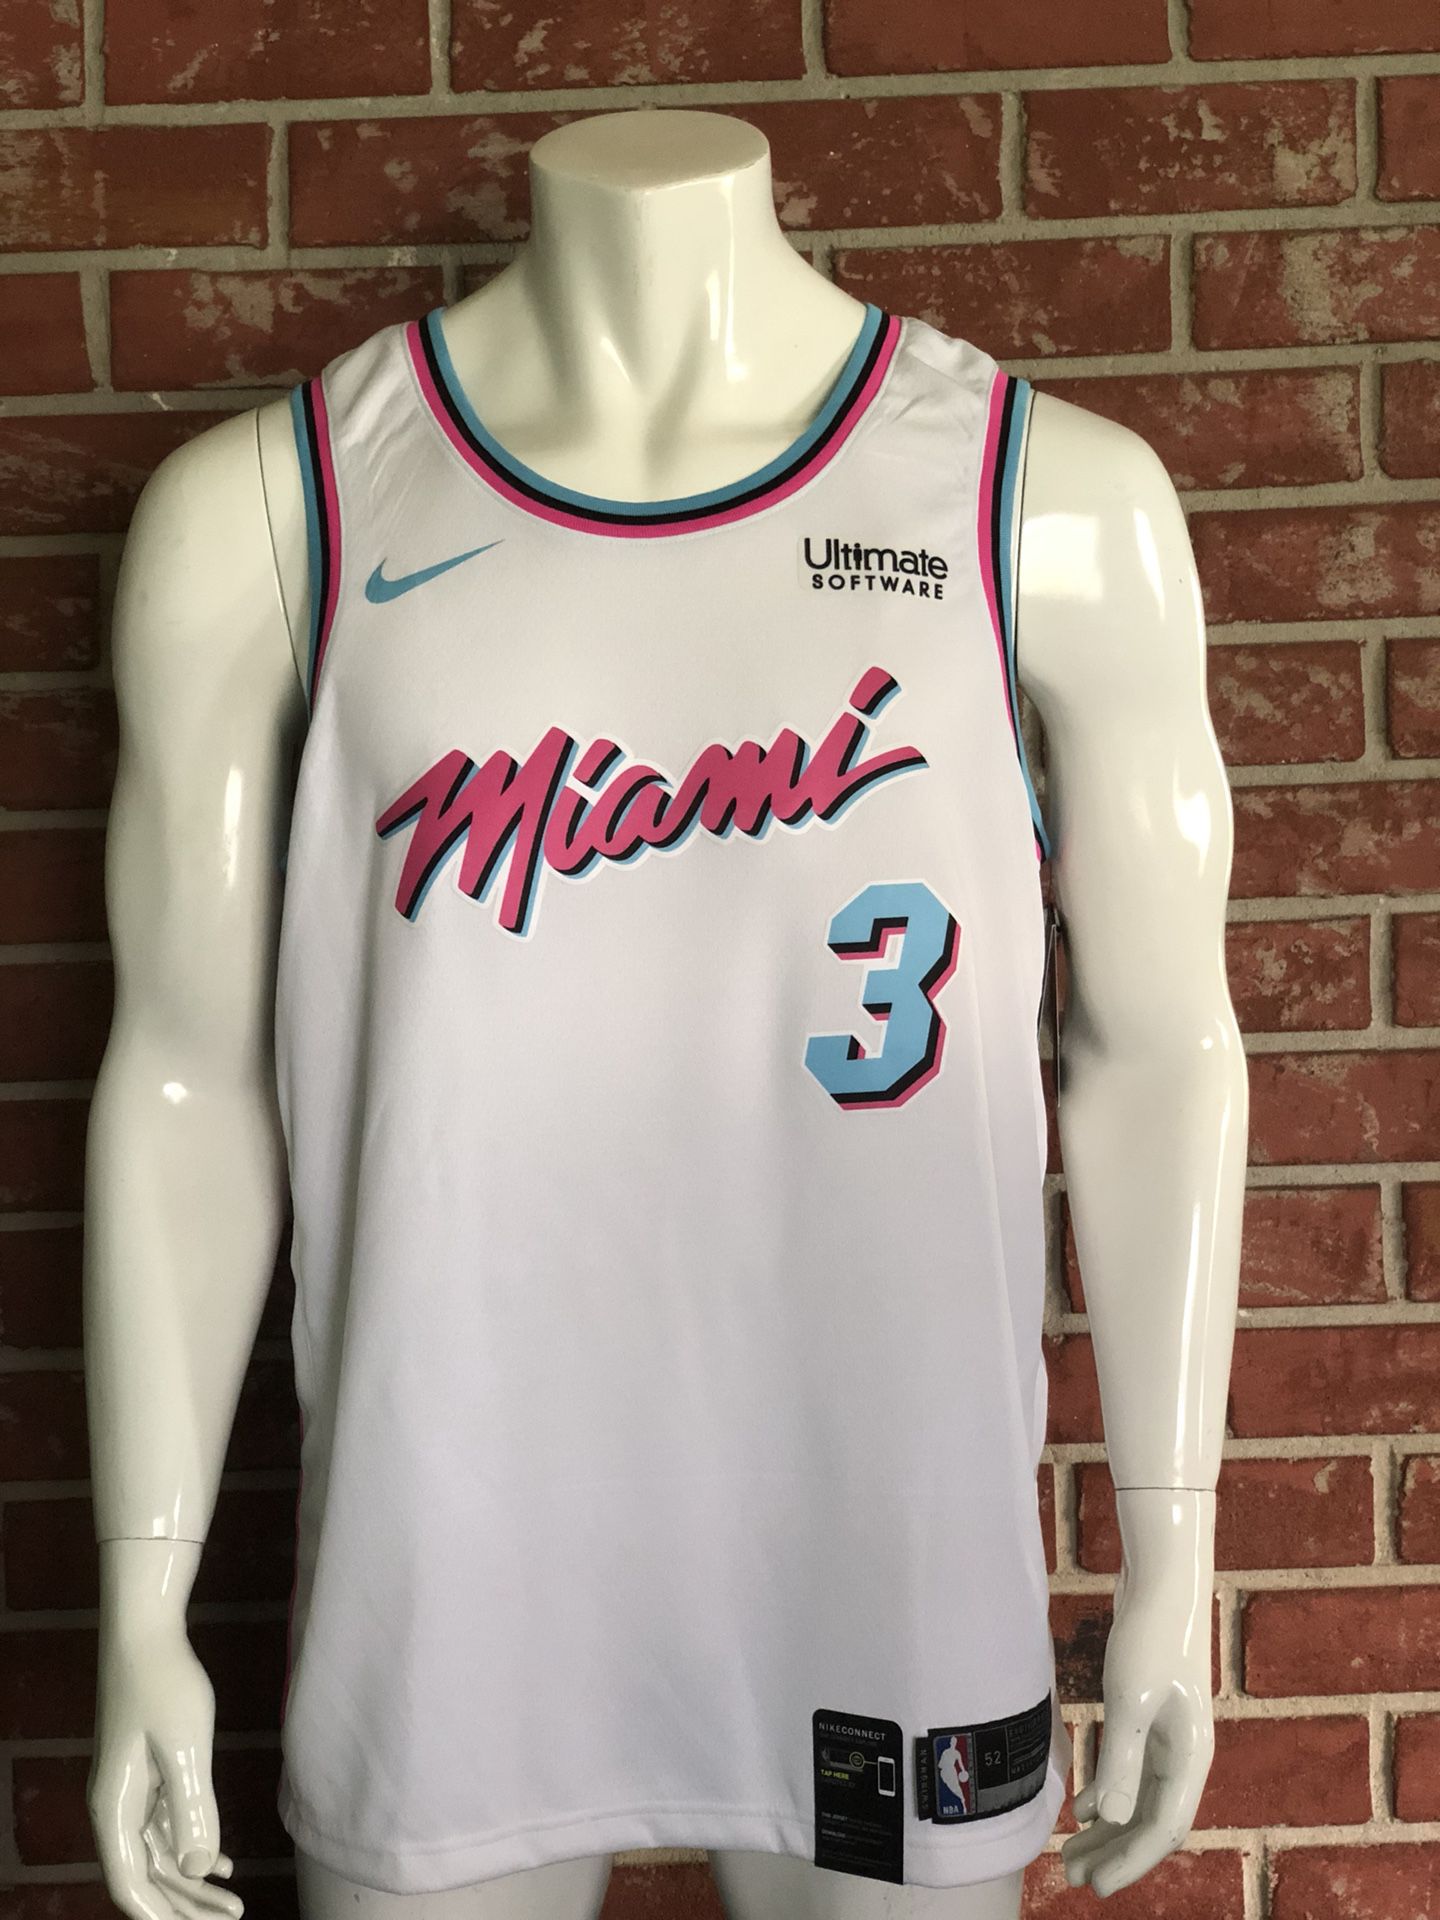 Miami Heat “D. Wade” Jersey (Miami Vice) for Sale in Hollywood, FL - OfferUp